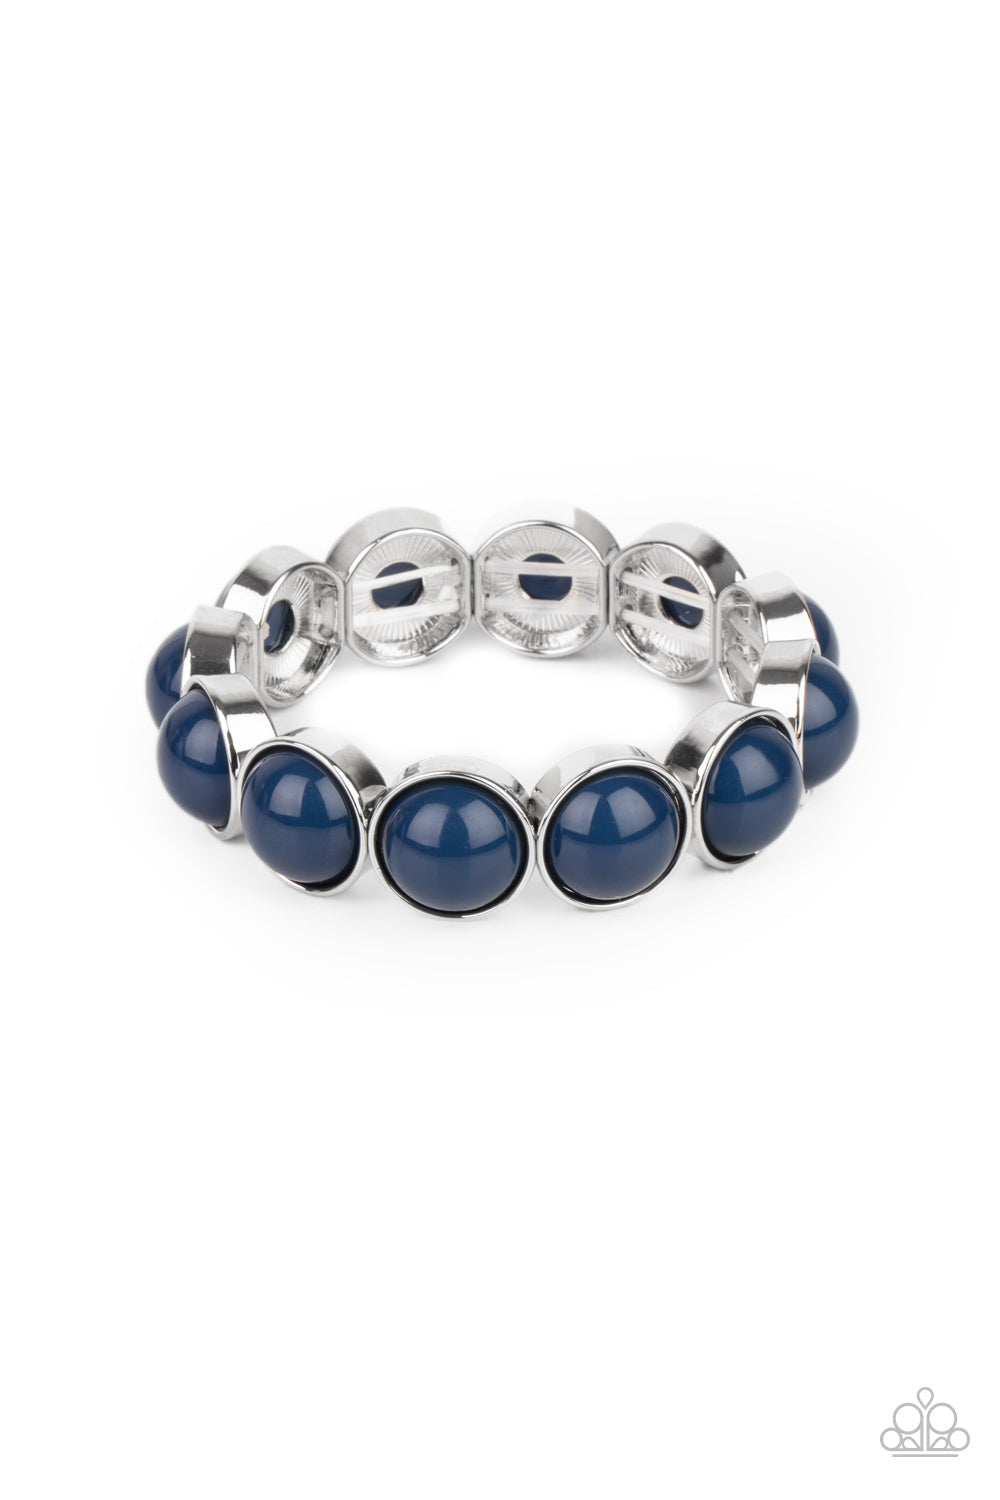 POP, Drop, and Roll - Blue and Silver Fashion Bracelet - Paparazzi Accessories - Featuring depthless blue beaded centers, bubbly silver frames are threaded along stretchy bands around the wrist for a powerful pop of color. Sold as one individual bracelet. 